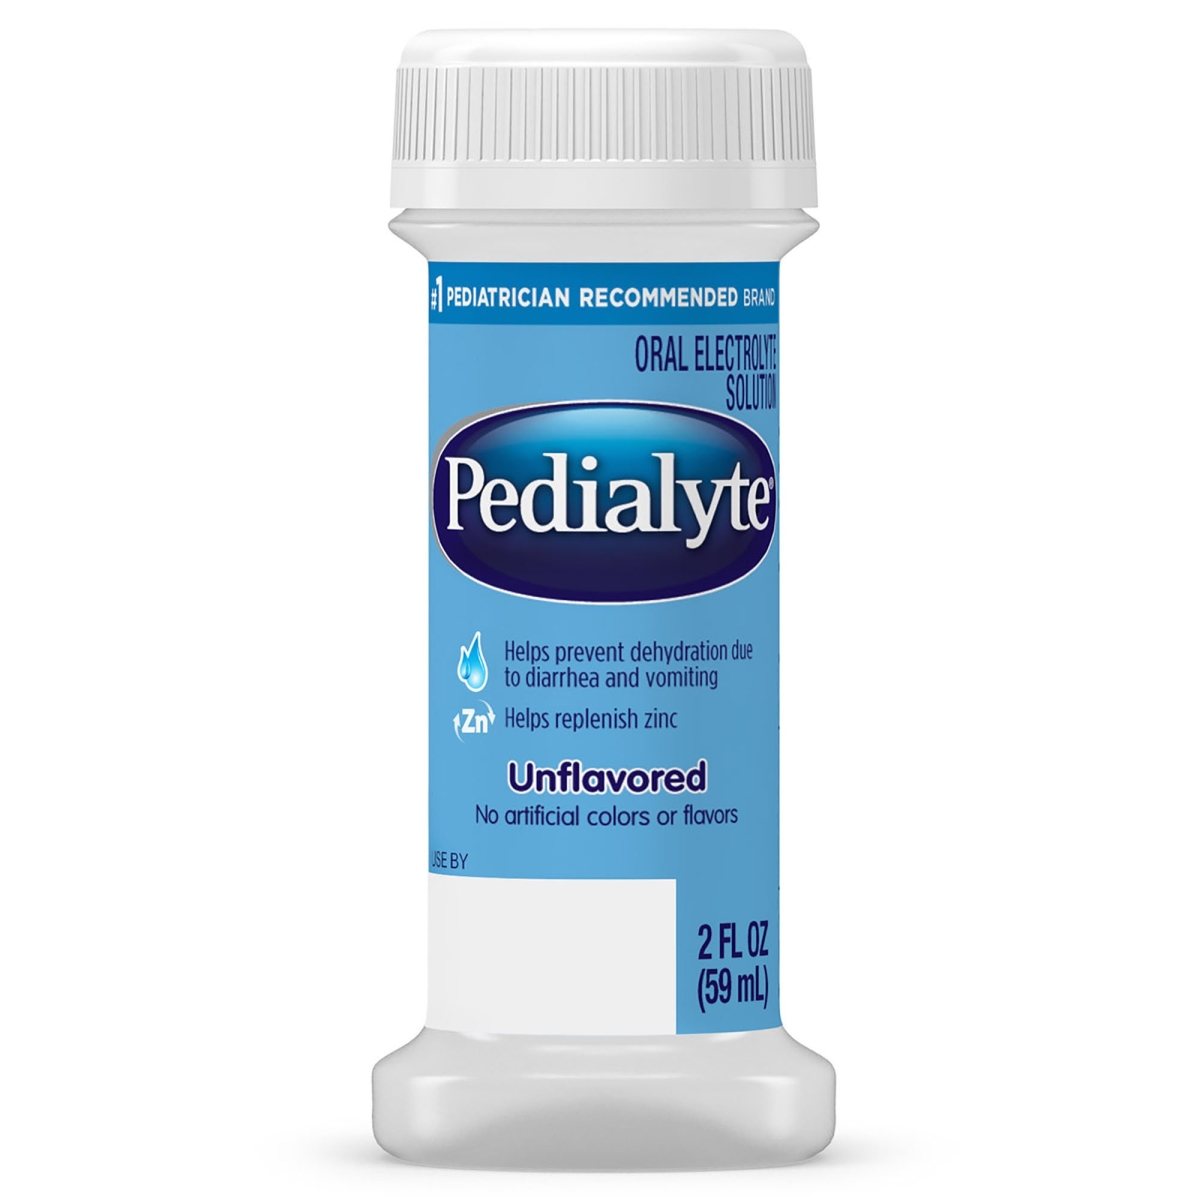 Picture of Abbott Nutrition 630457-CS 2 oz Pediatric Oral Electrolyte Solution Pedialyte - Pack of 96